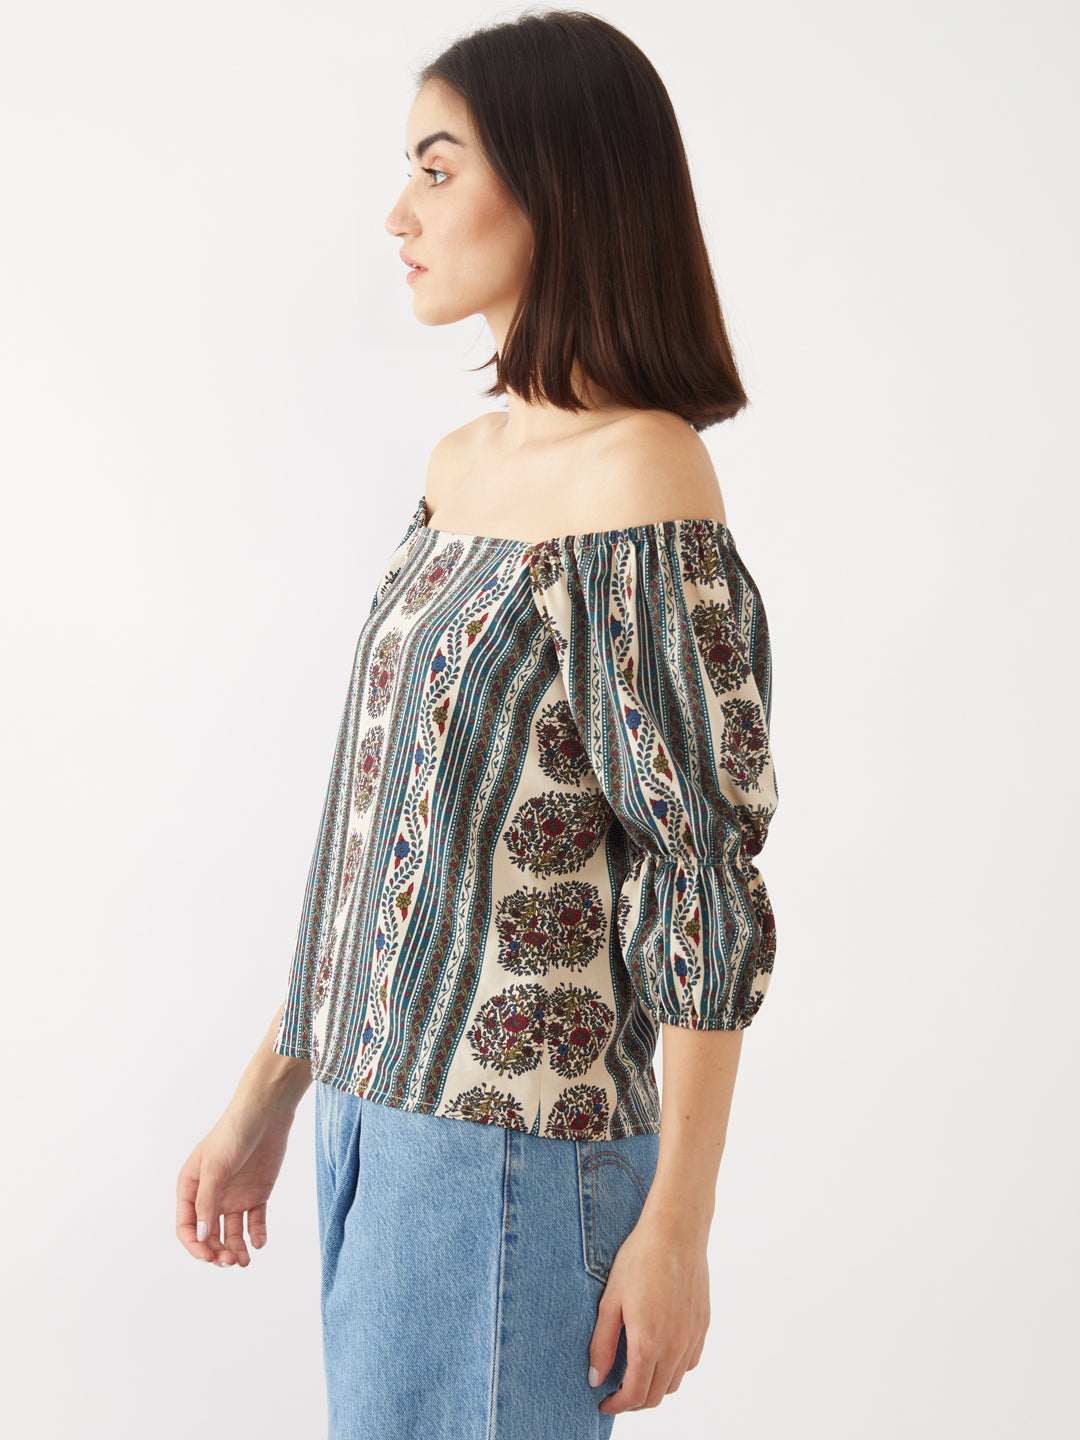 Multicolored Floral Print Top For Women